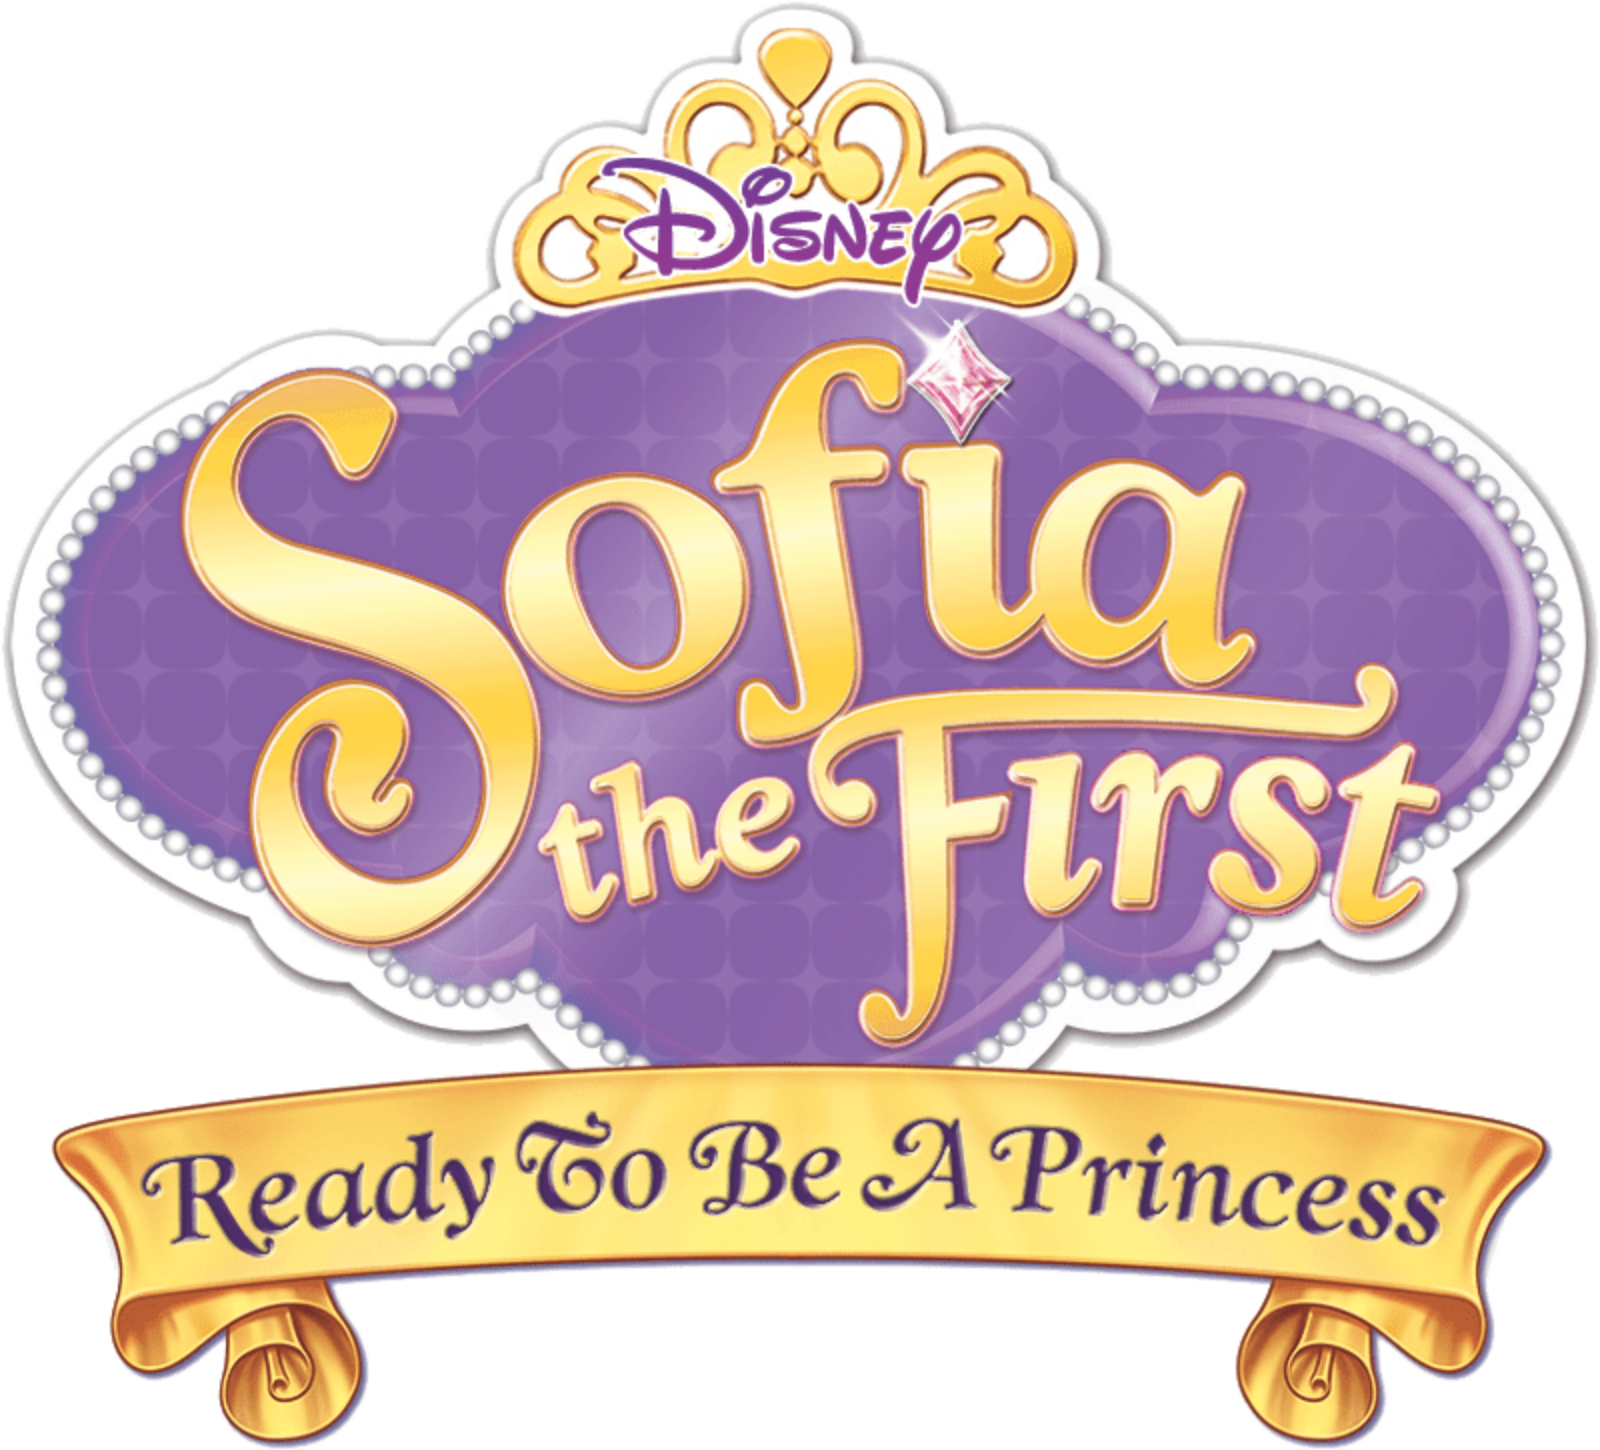 Sofia the First (12 DVDs Box Set)